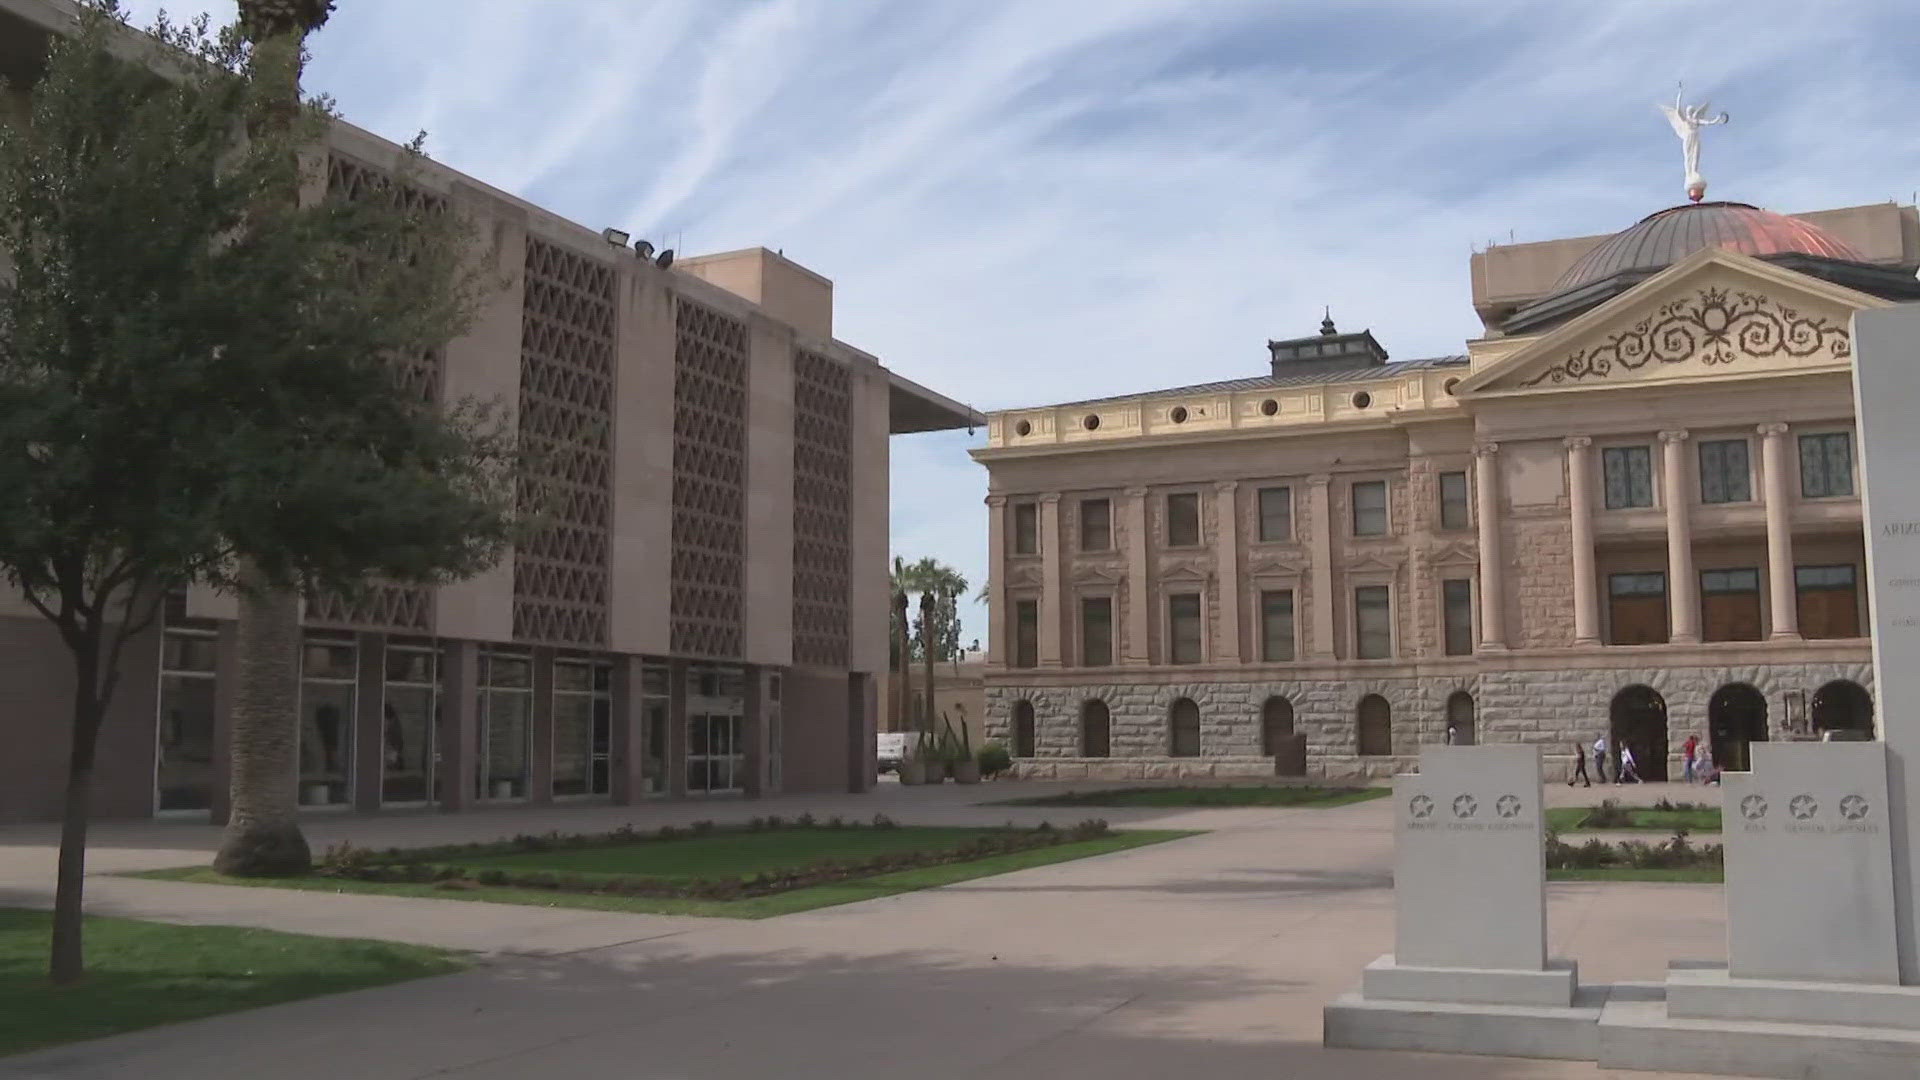 After an all-day work session on Saturday, Arizona's state legislature agreed to a $16 billion budget. Watch the video for more details.